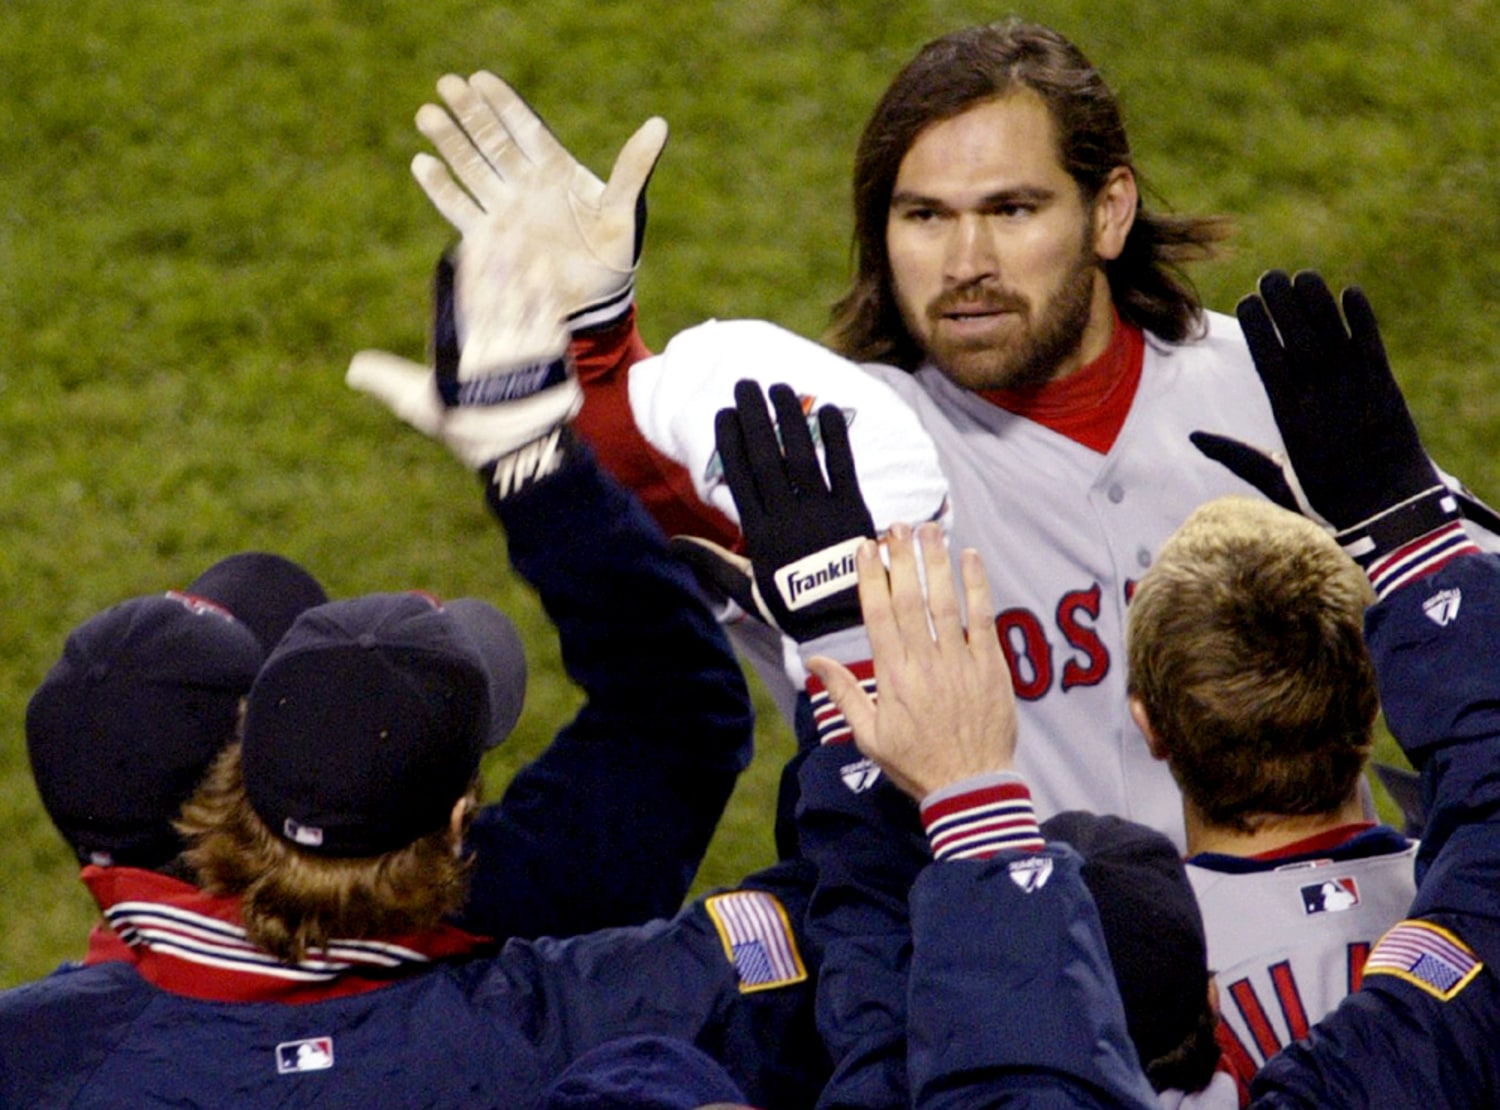 How the Red Sox became 'The Idiots': Manny, Pedro, Millar and the